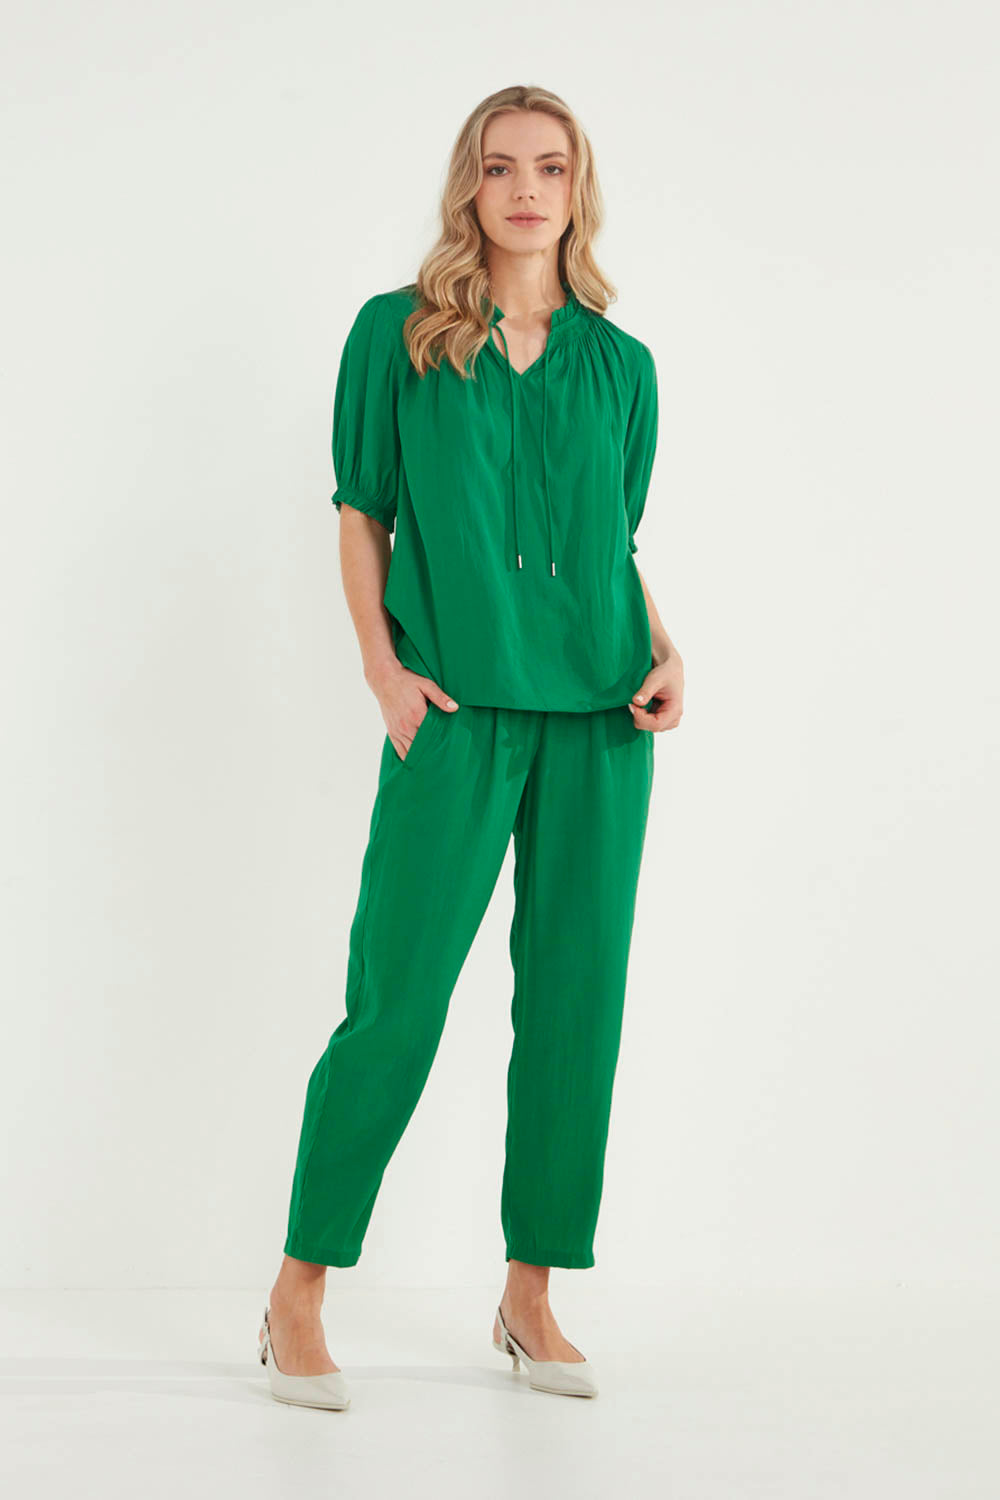 Glide by Verge - Reflection Top - Emerald - Top VERGE